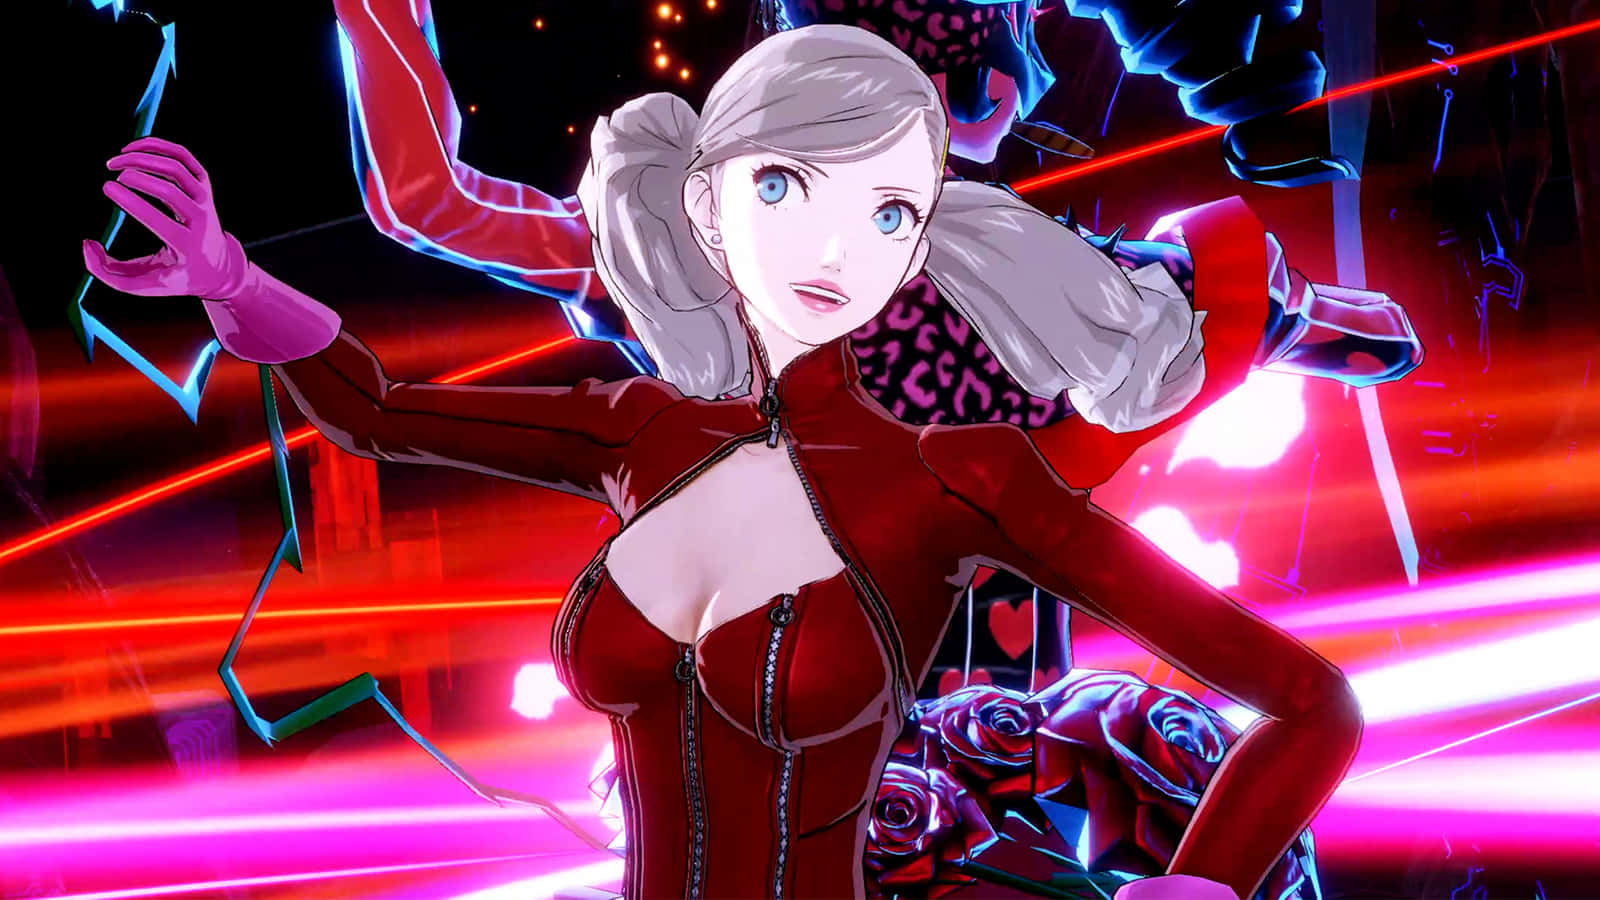 Face the Future with Style in Persona 5